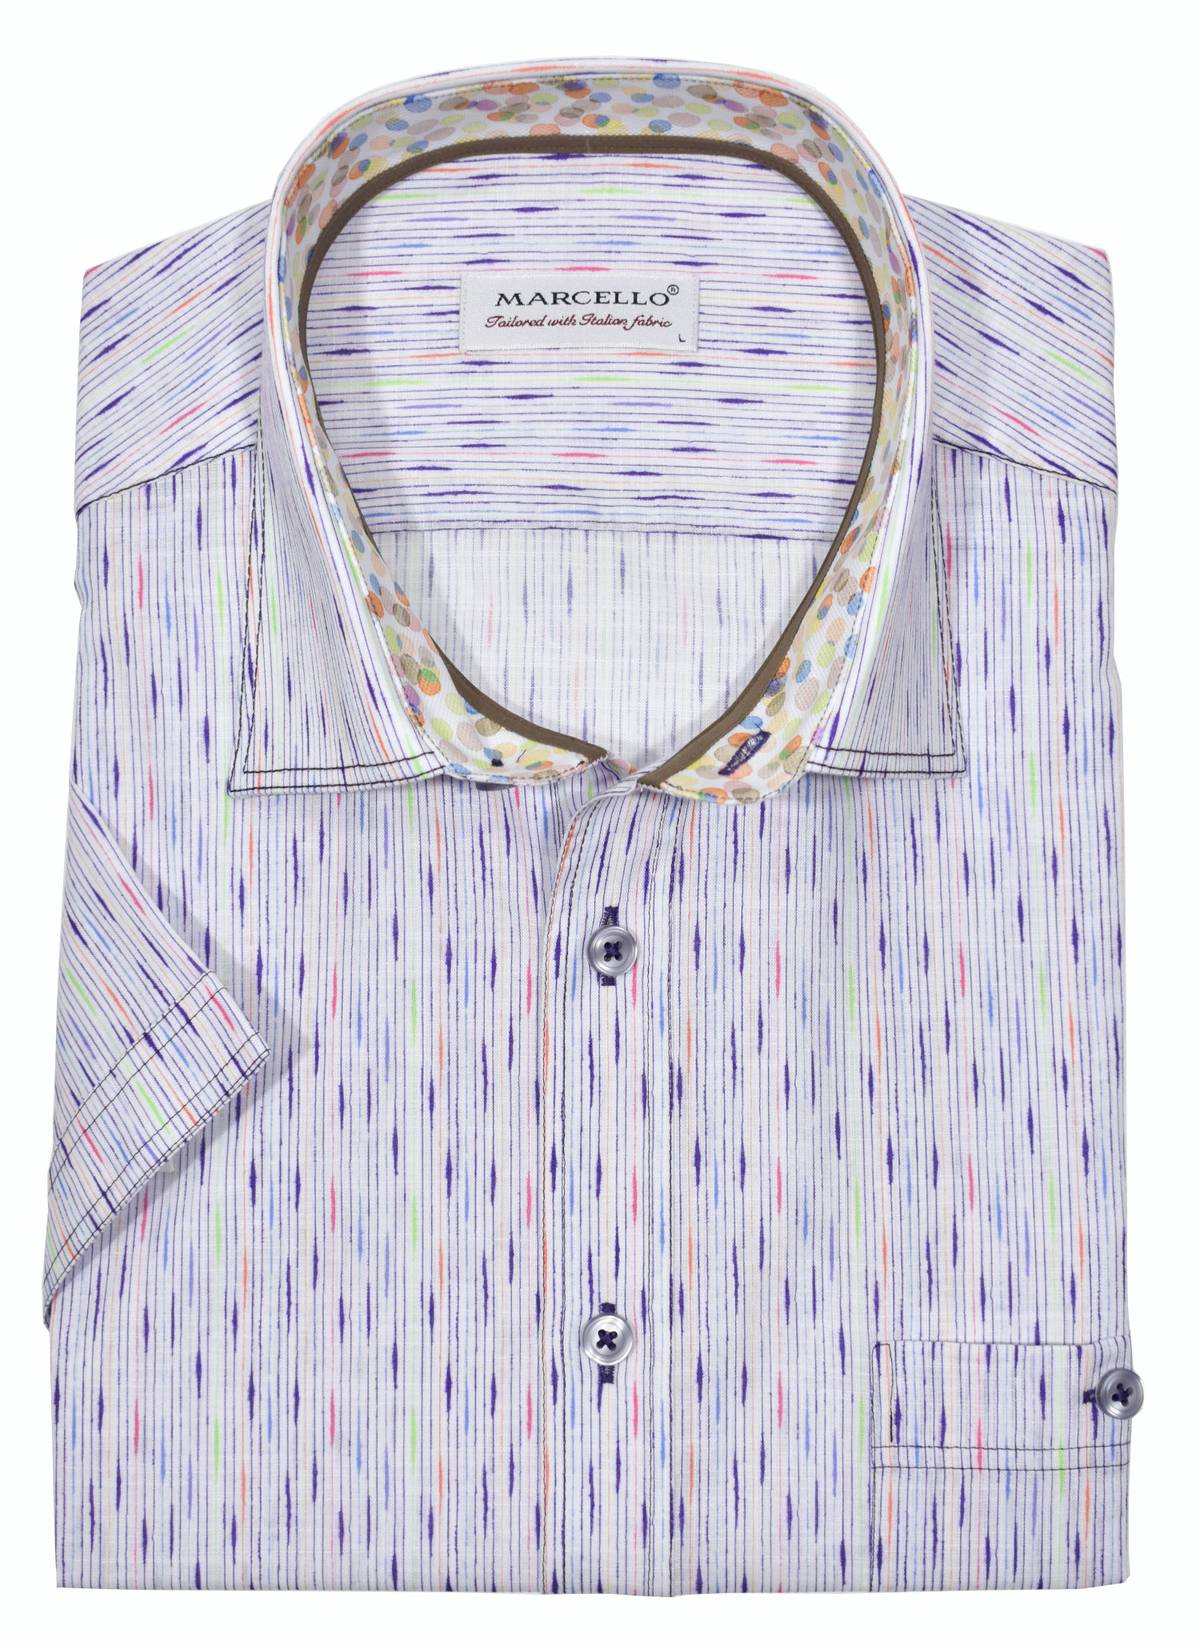 A unique brushed stripe with accentuated colors, on soft cotton fabric, welcomes the Spring/Summer season.  To enhance the look the stiching is double track and in a contrast color.  Fashion trim fabric, neck piping and a classic buttoned chest pocket add to the look.  Classic shaped fit.  By Marcello Sport